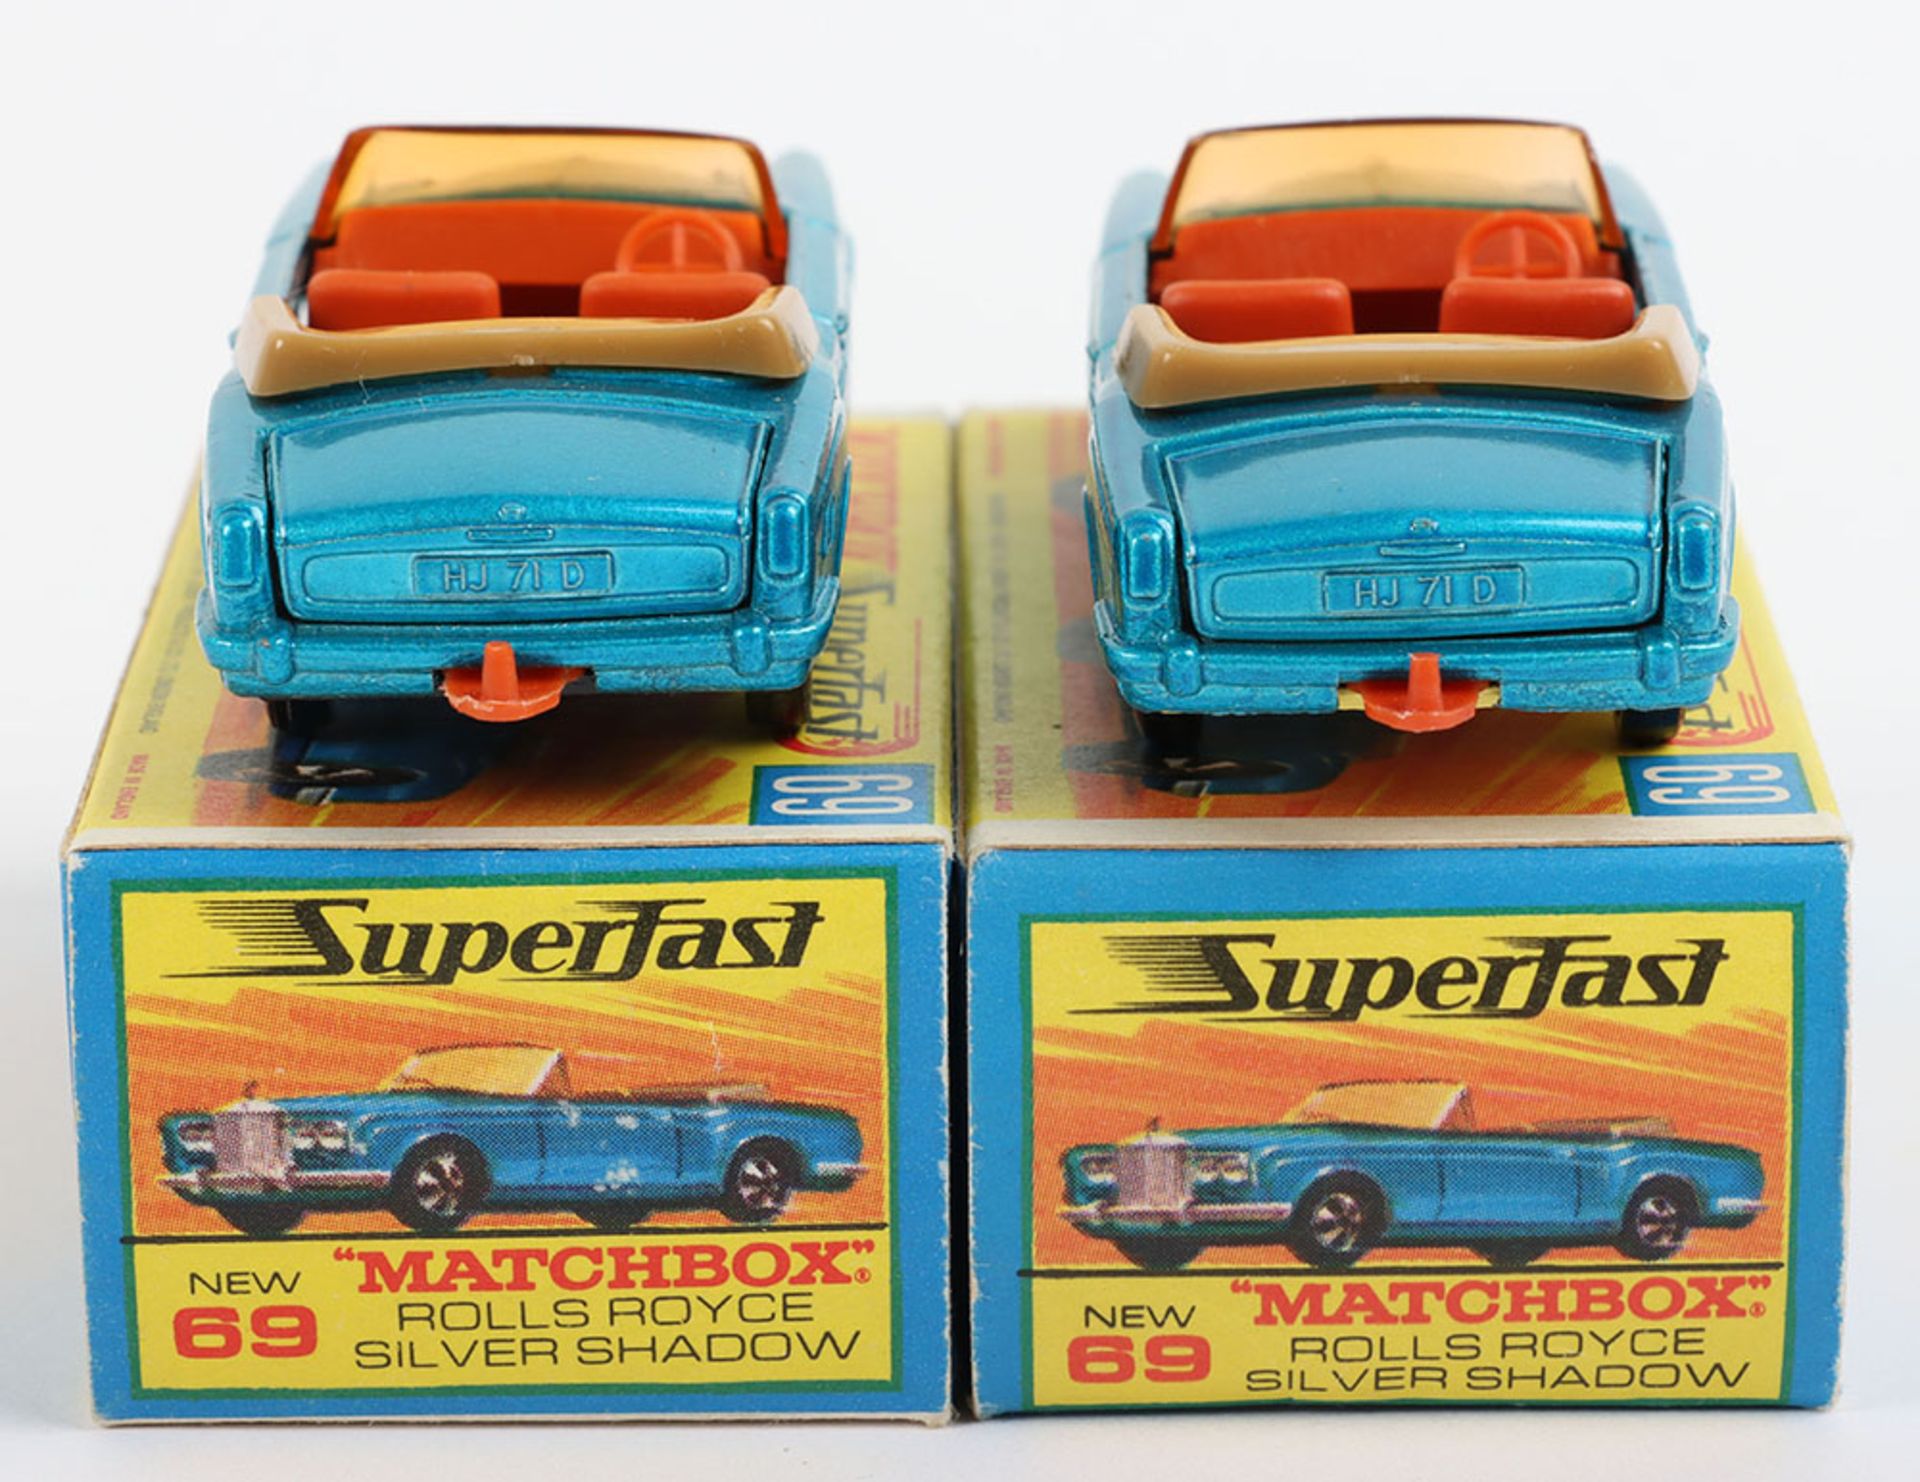 Two Boxed Matchbox Lesney Superfast 69c Rolls Royce Silver Shadow Models - Image 4 of 5